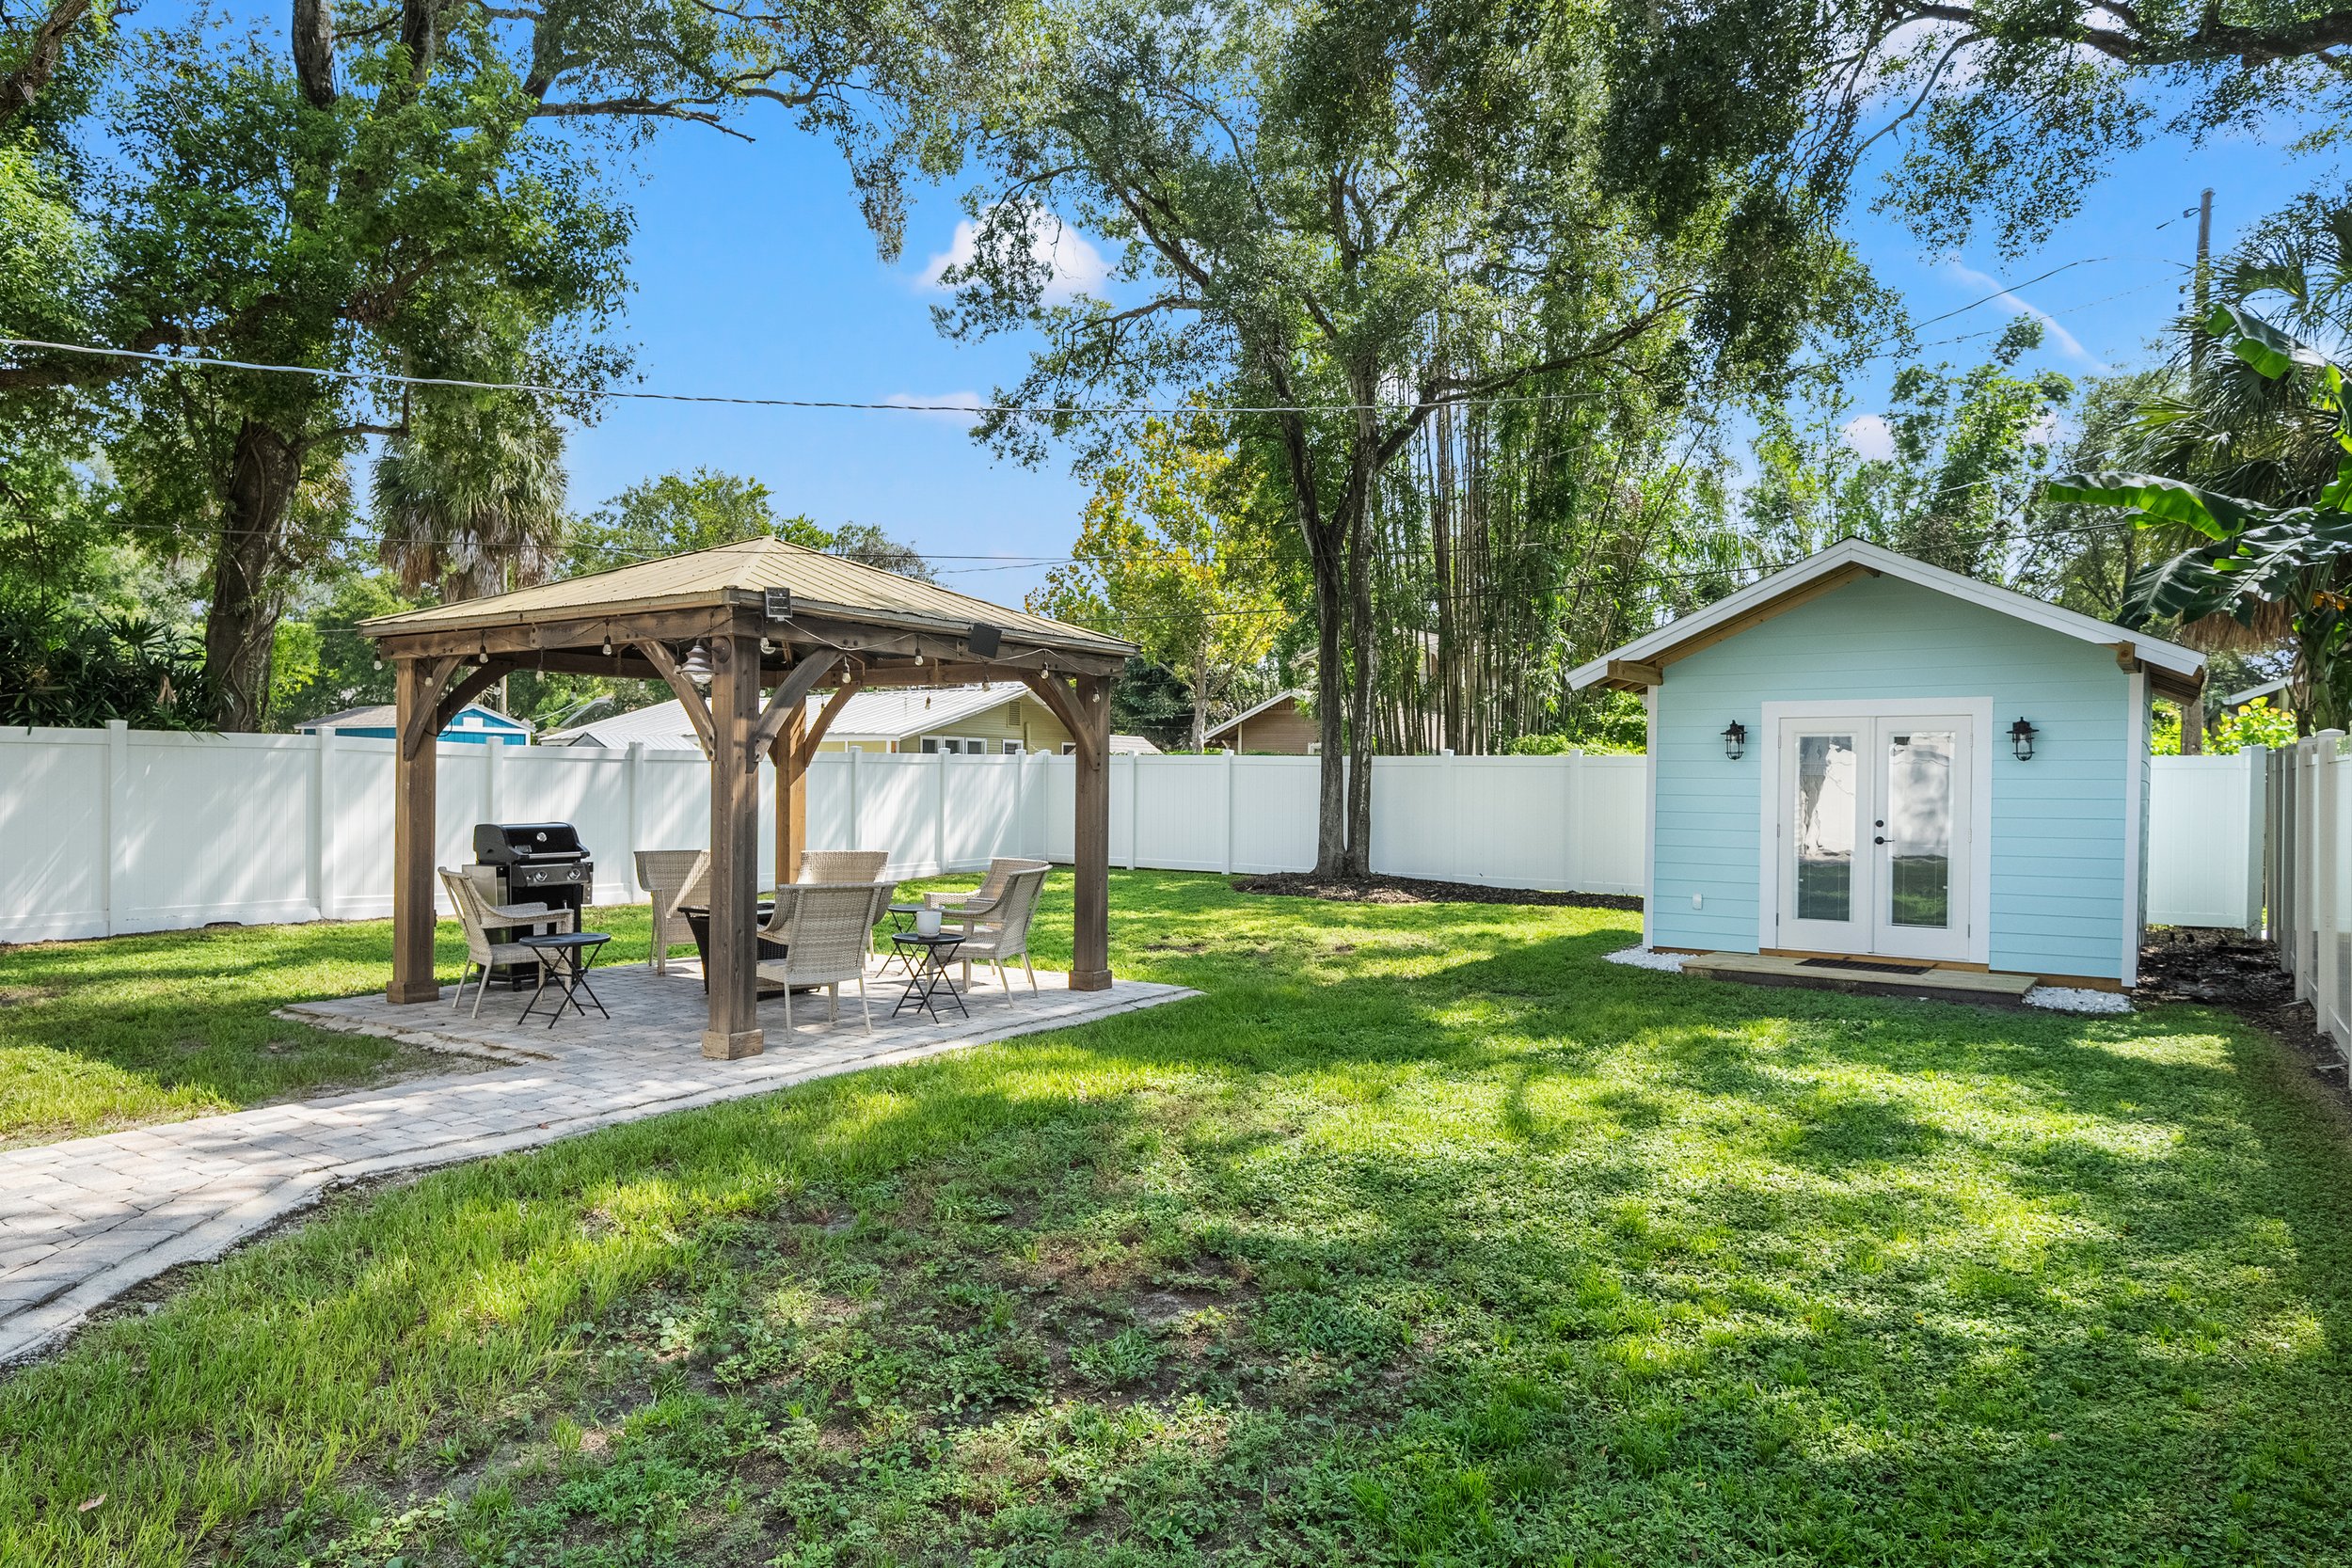 5707 N Taliaferro Ave-seminole heights-tampa-pavilion and shed.jpg